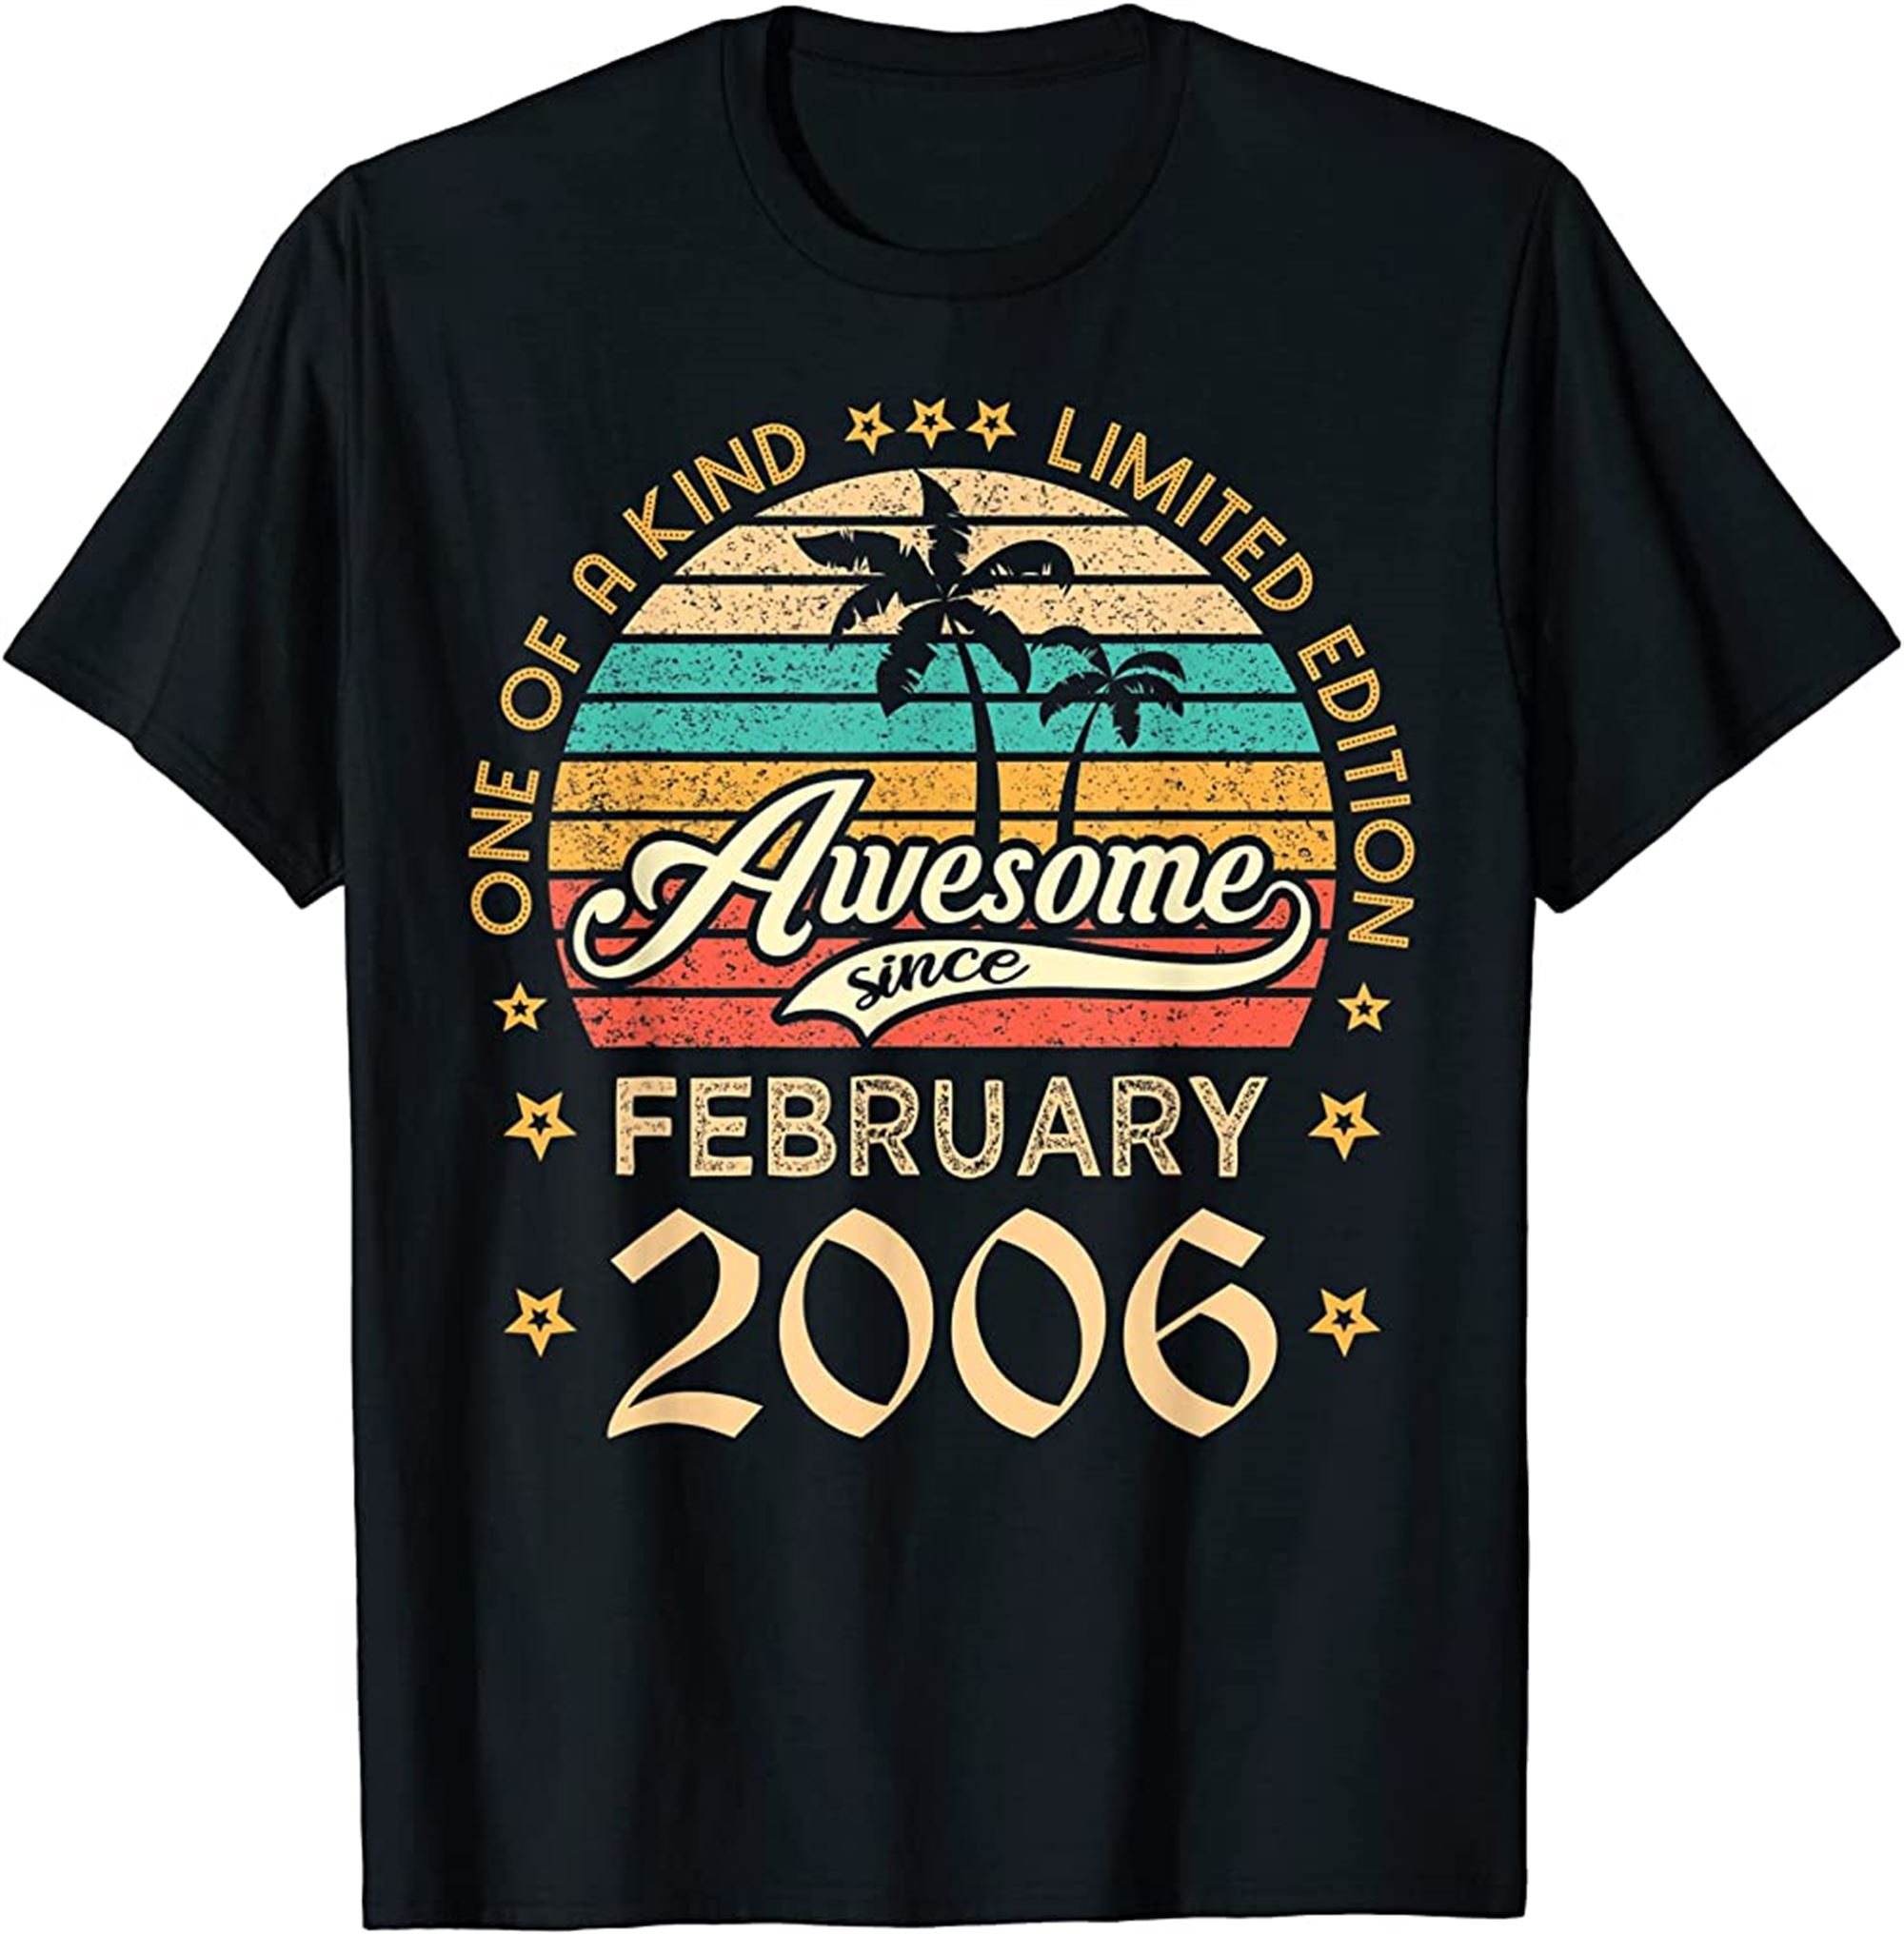 Awesome Since February 2006 Limited Edition Vintage Birthday T-shirt Size Up To 5xl